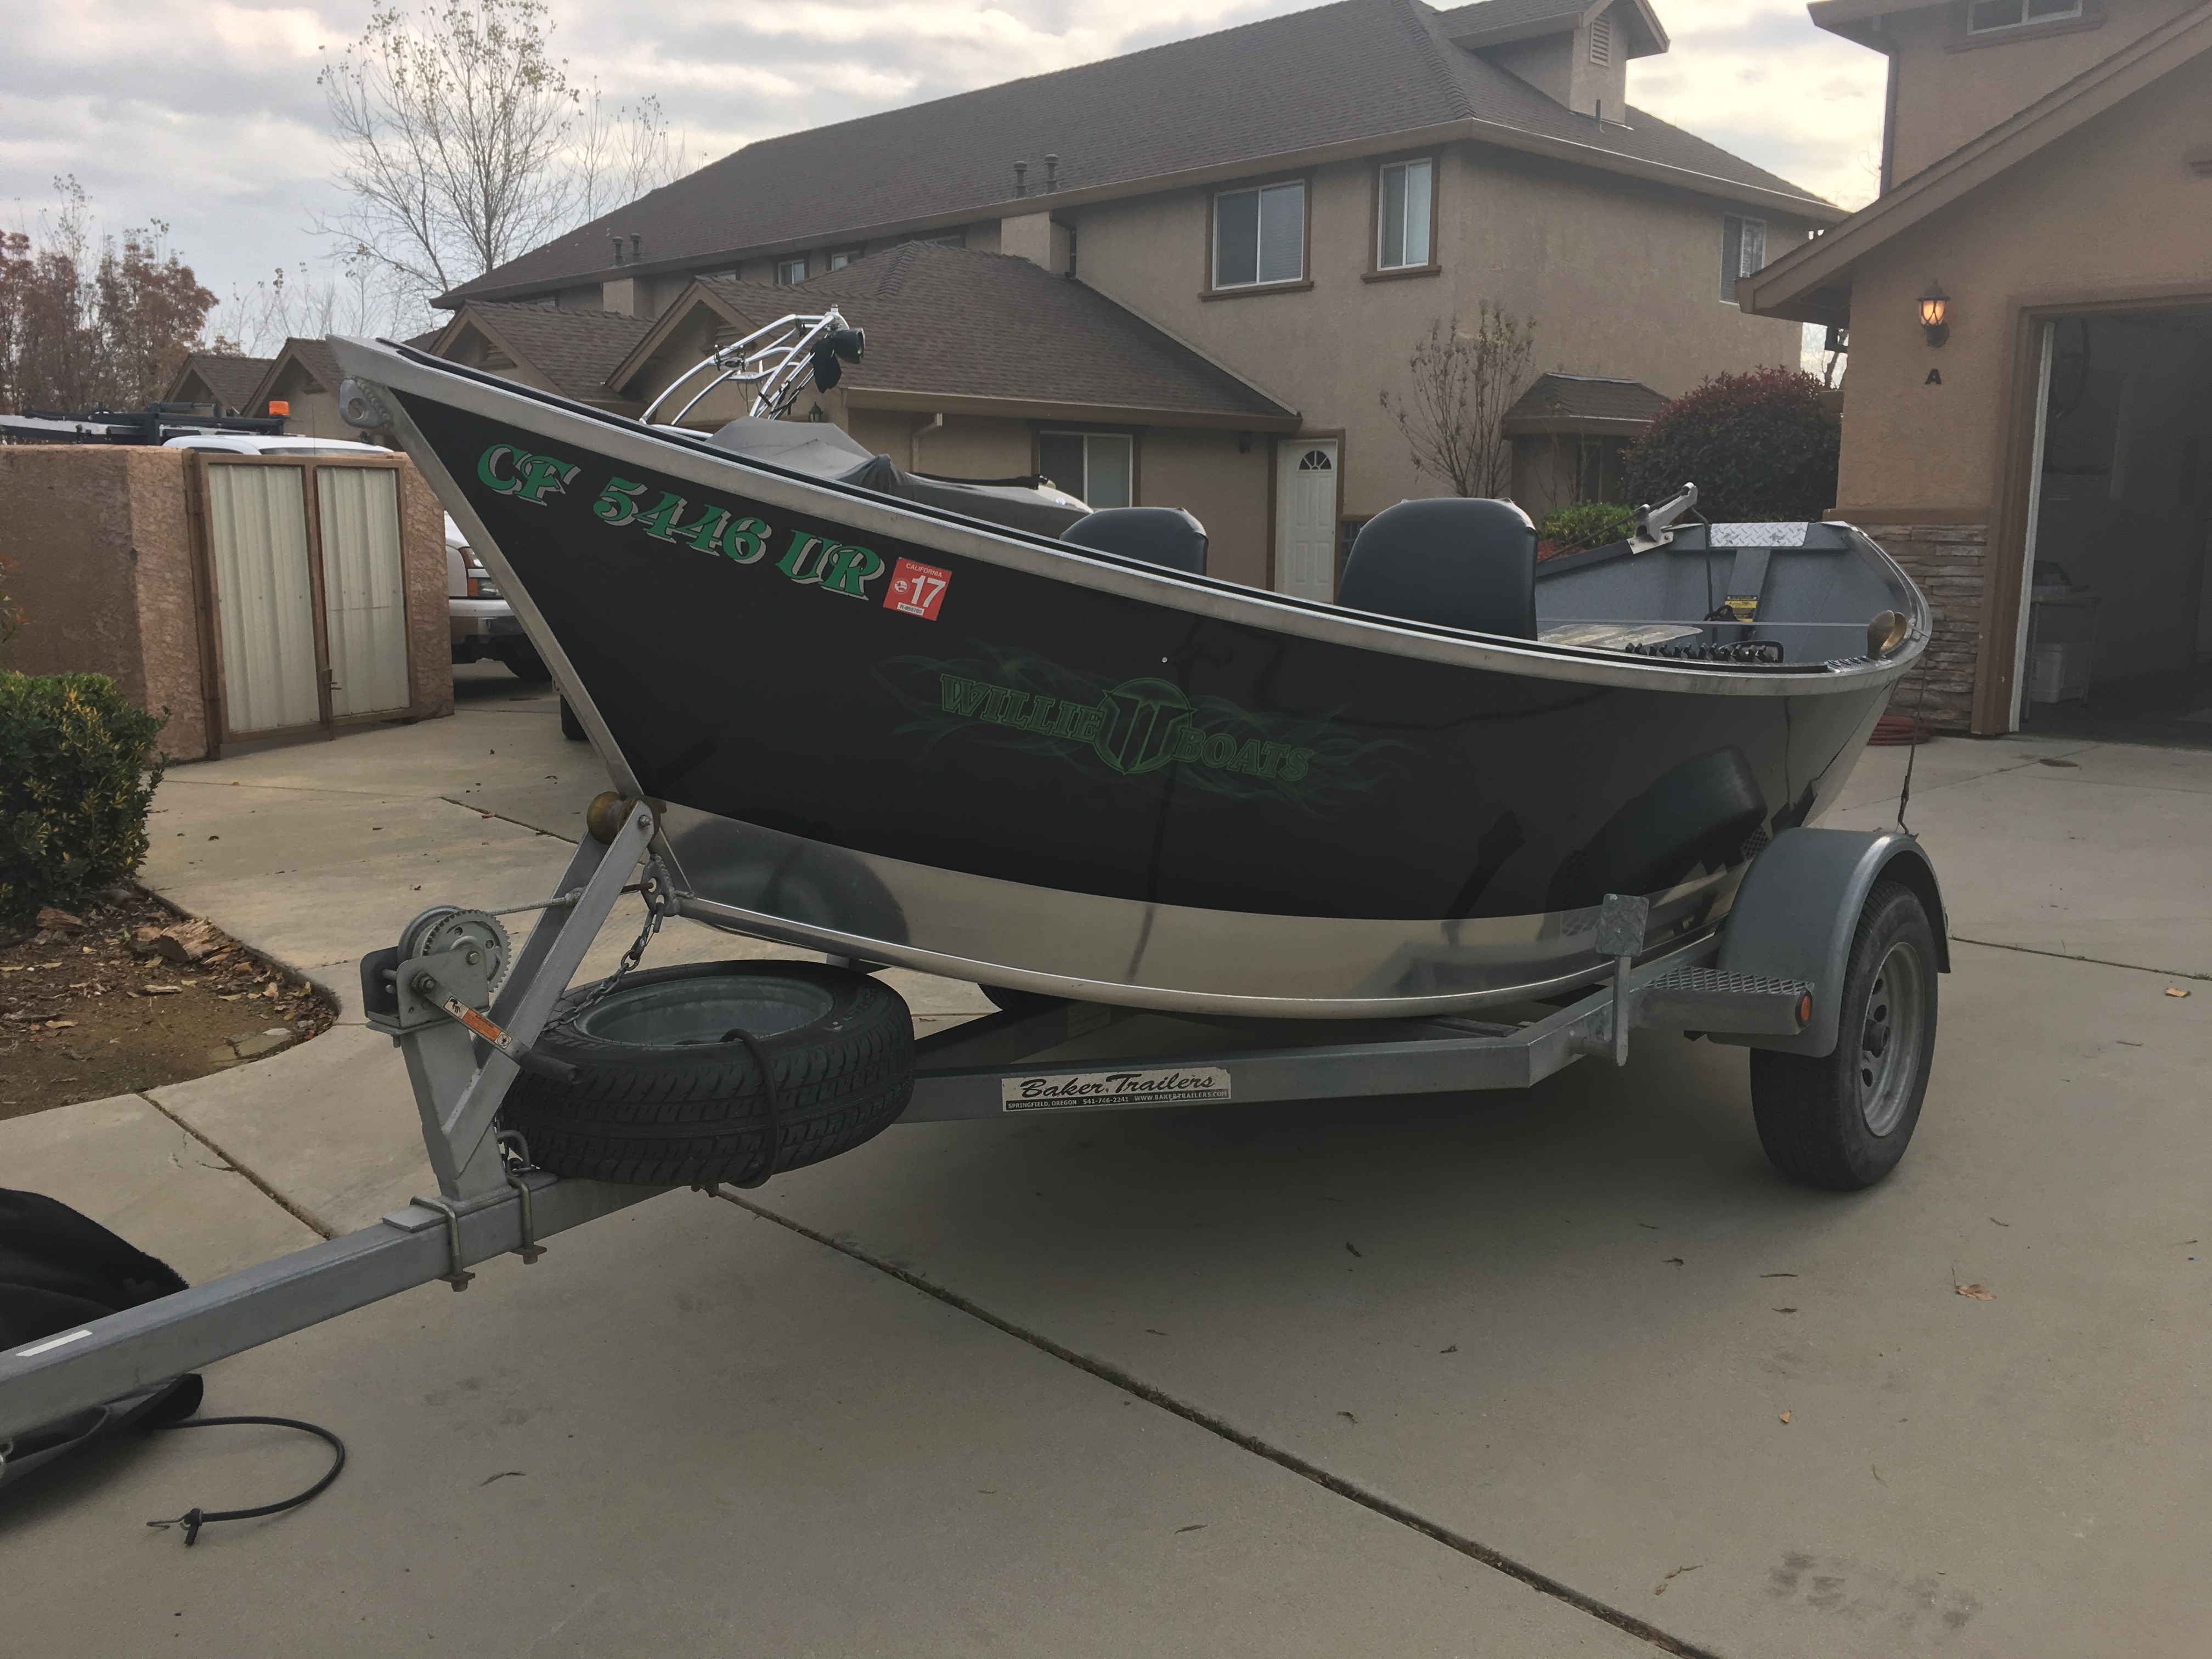 2010 17X60 Willie Drift Boat $11,000 - Willie Boats